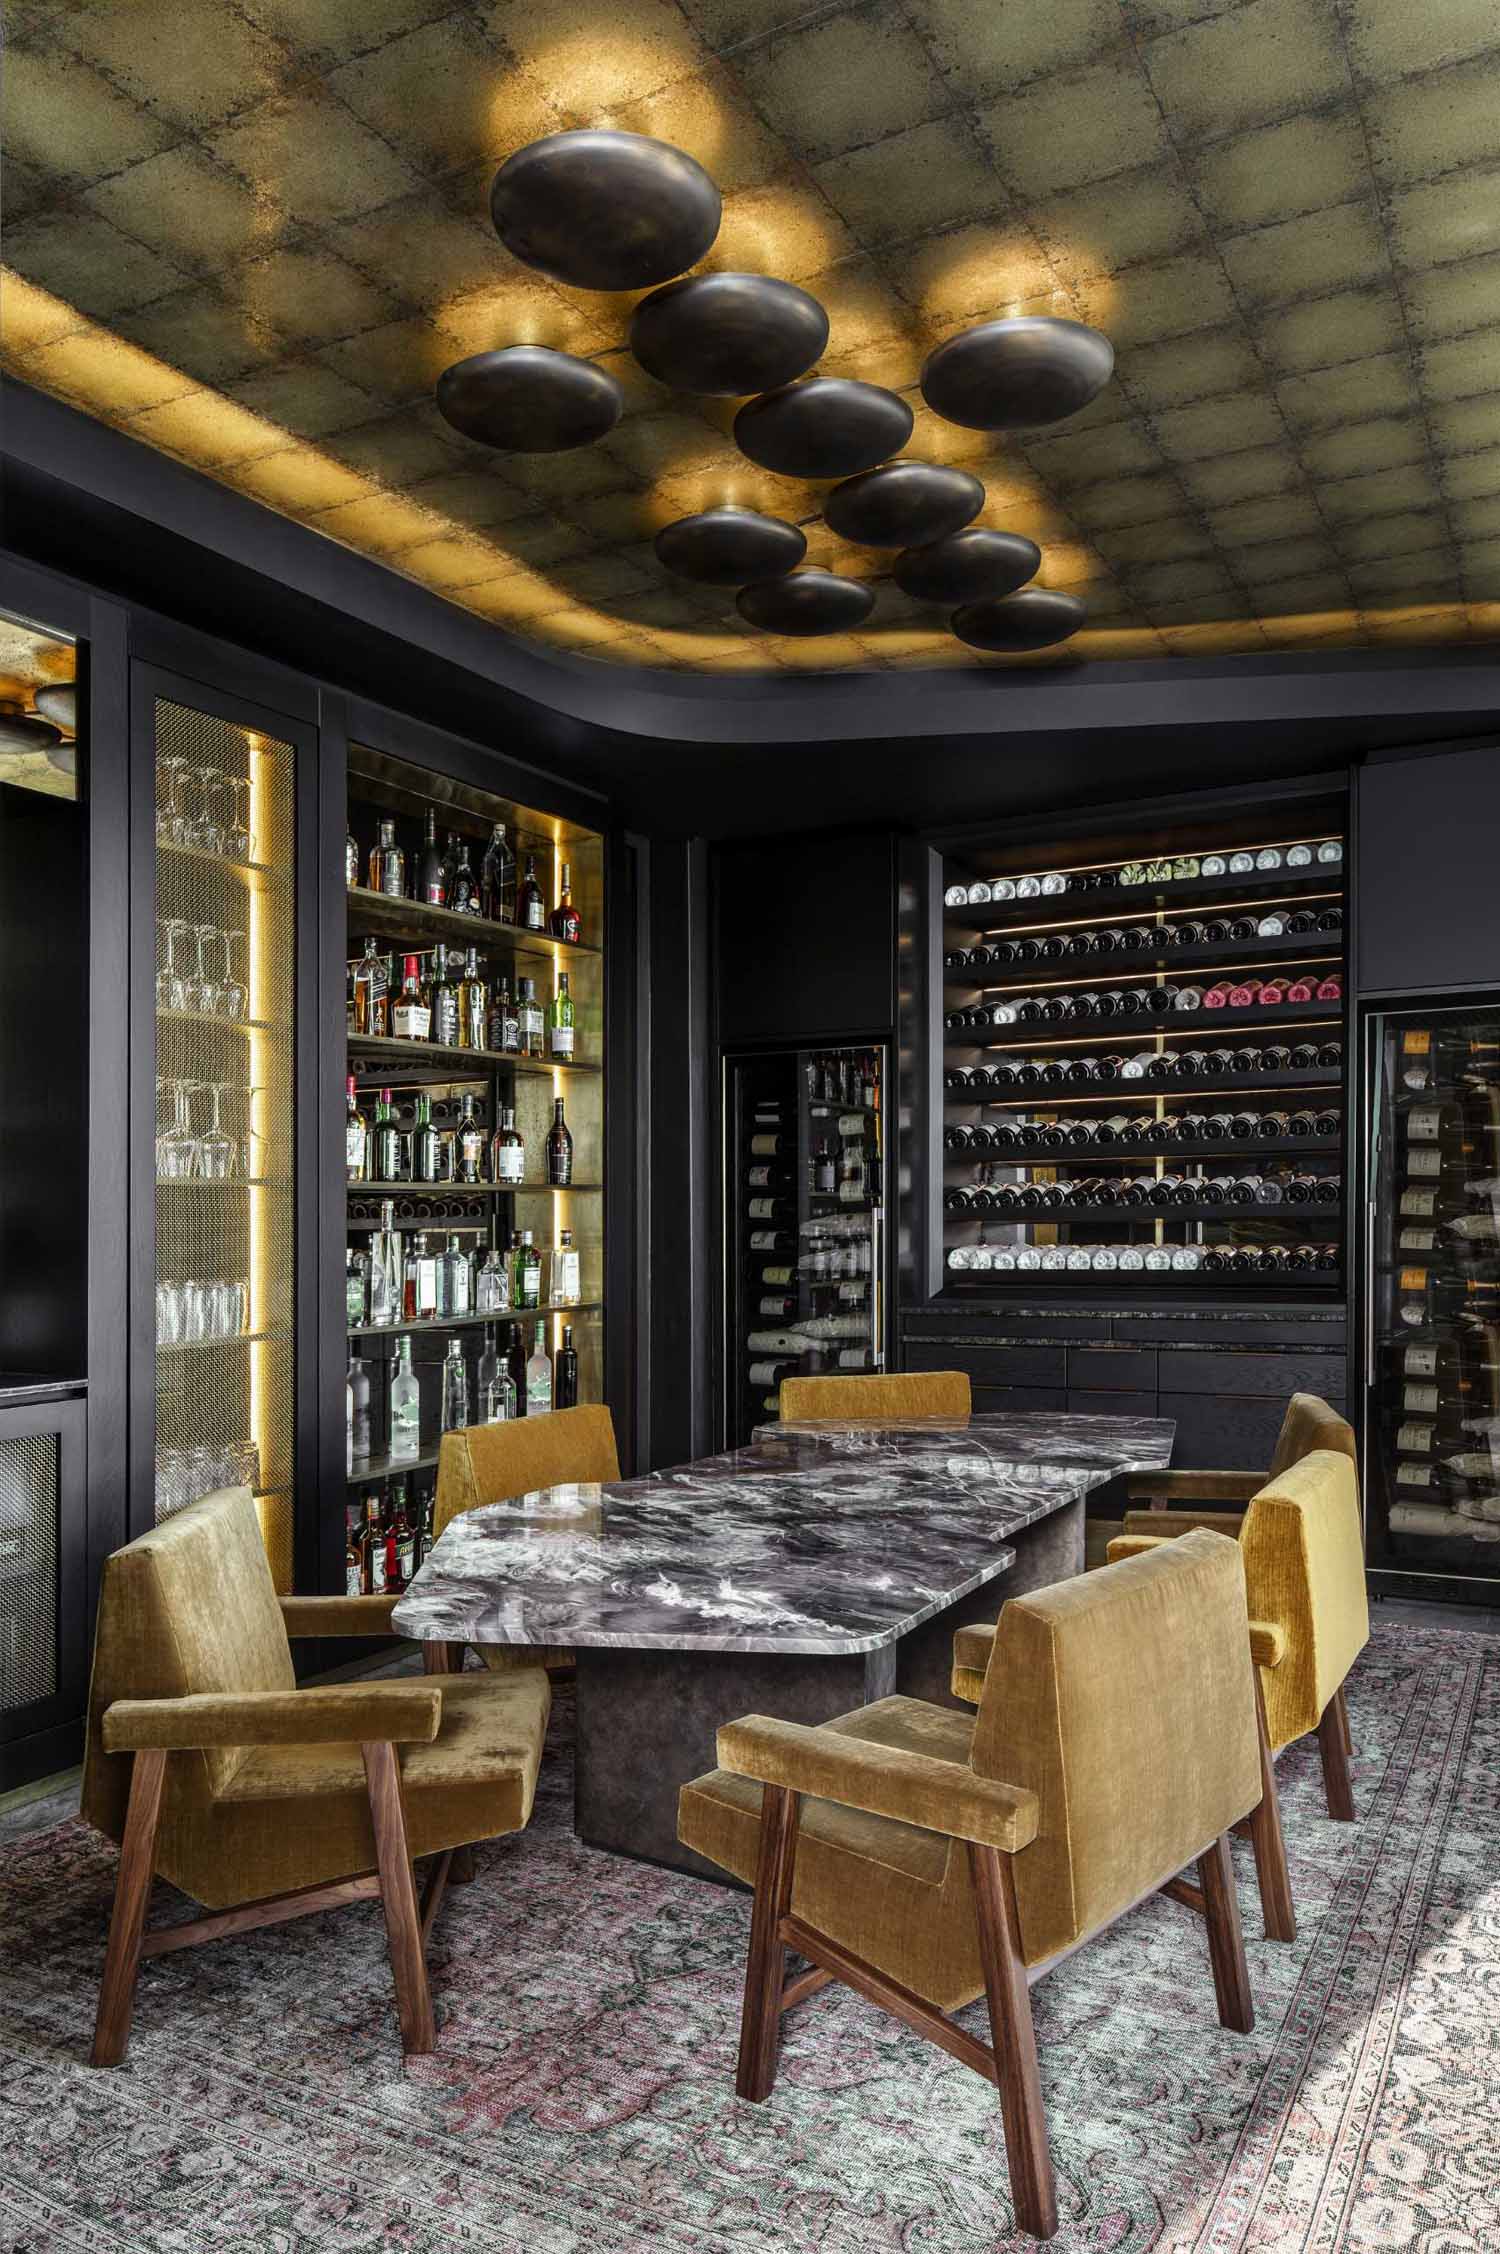 A modern wine room with a large table surrounded by chairs, and shelving for various bottle and gl، storage.